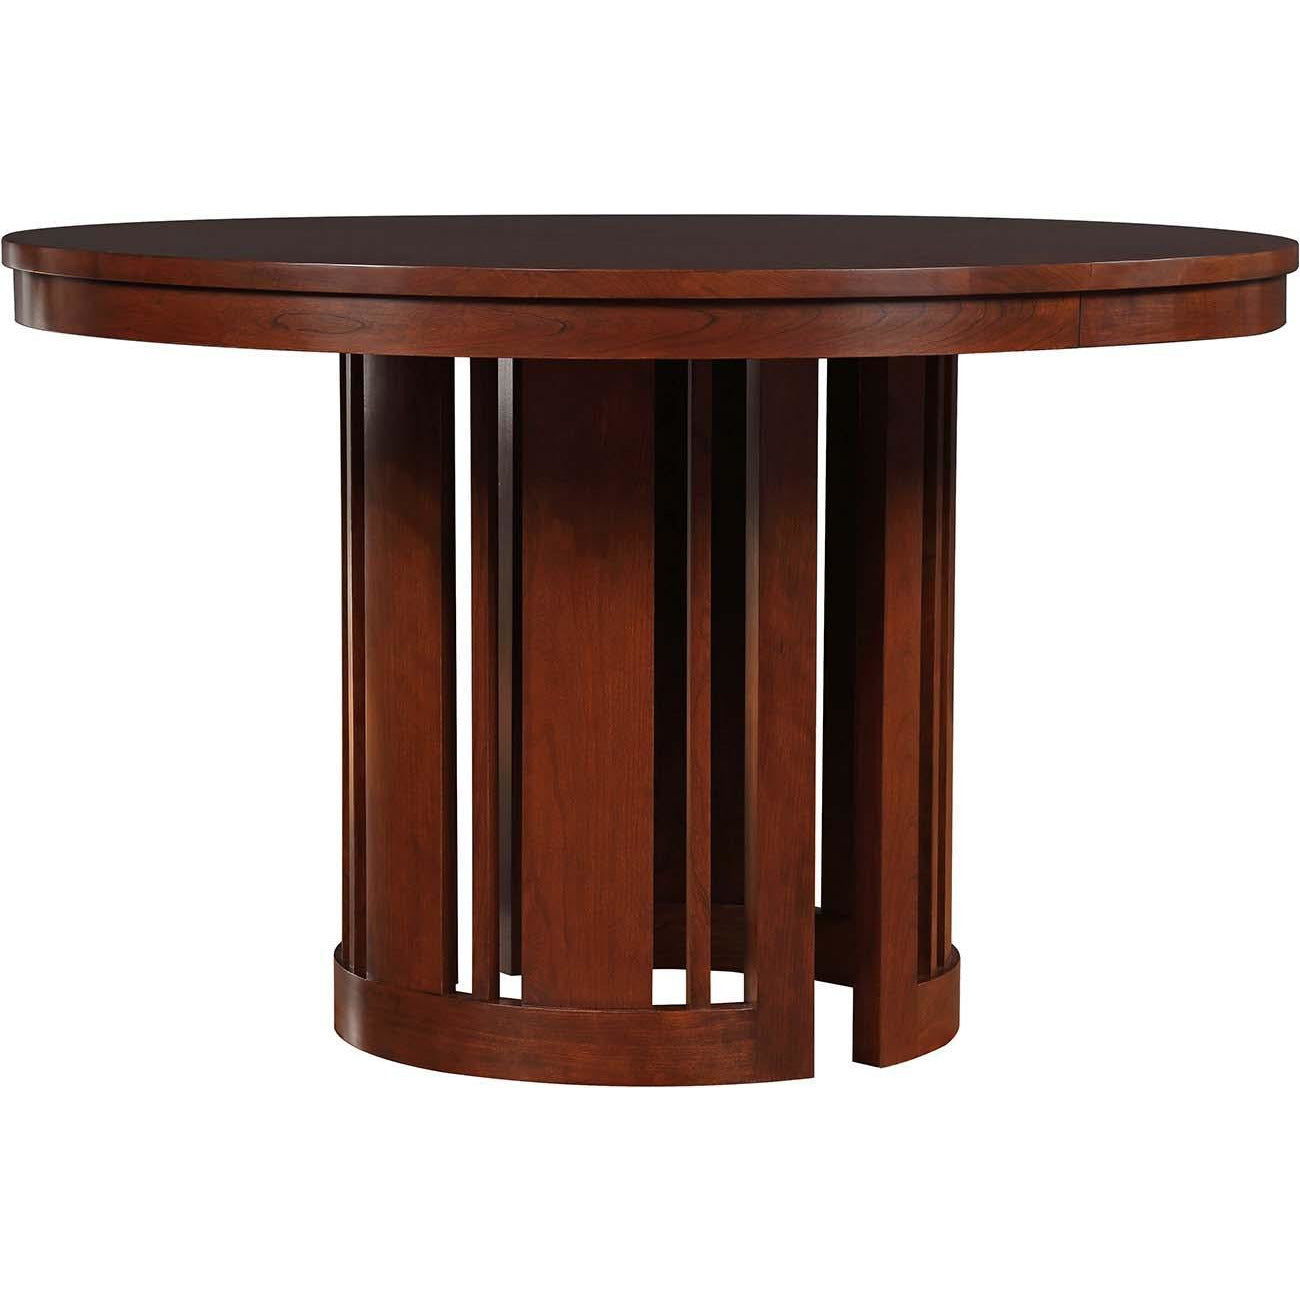 Park Slope Round Dining Table with Leaves